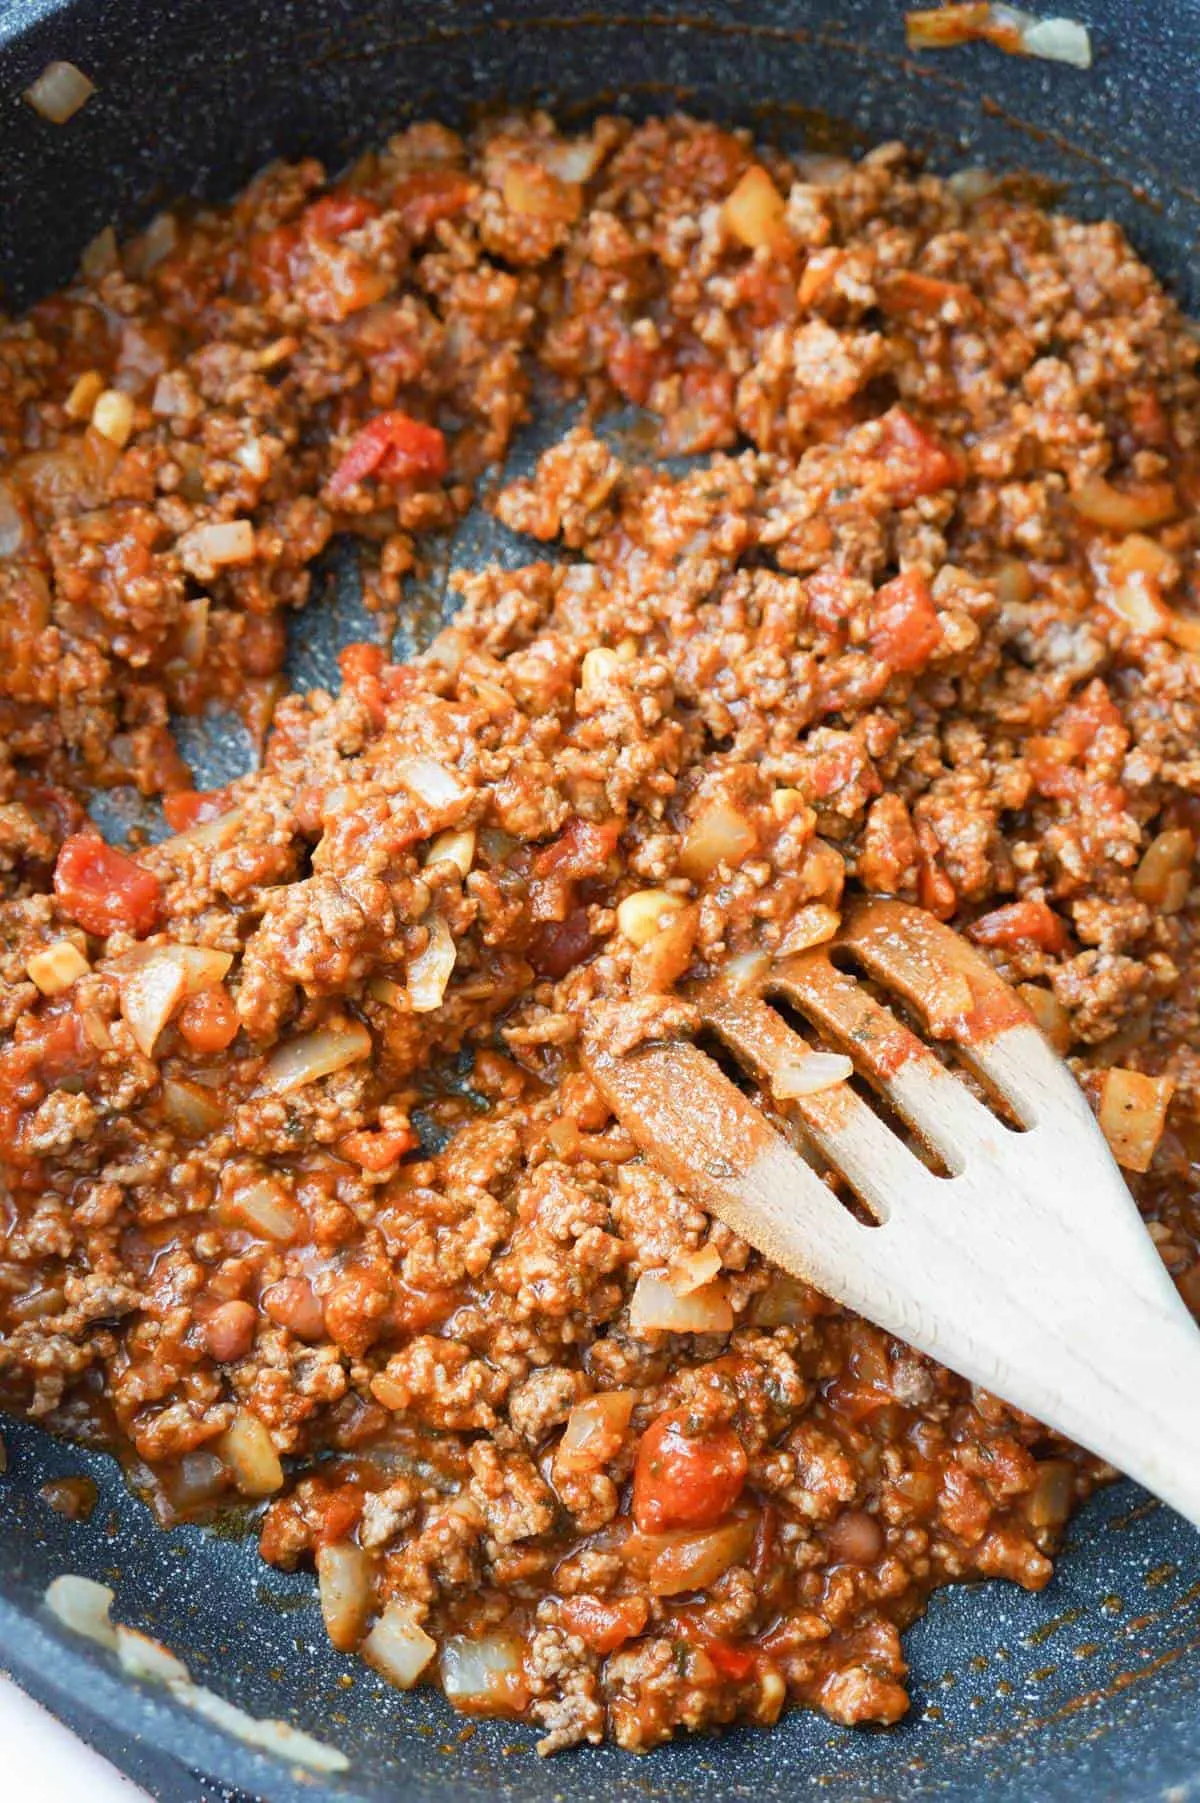 ground beef tossed in salsa and chili sauce in a saute pan